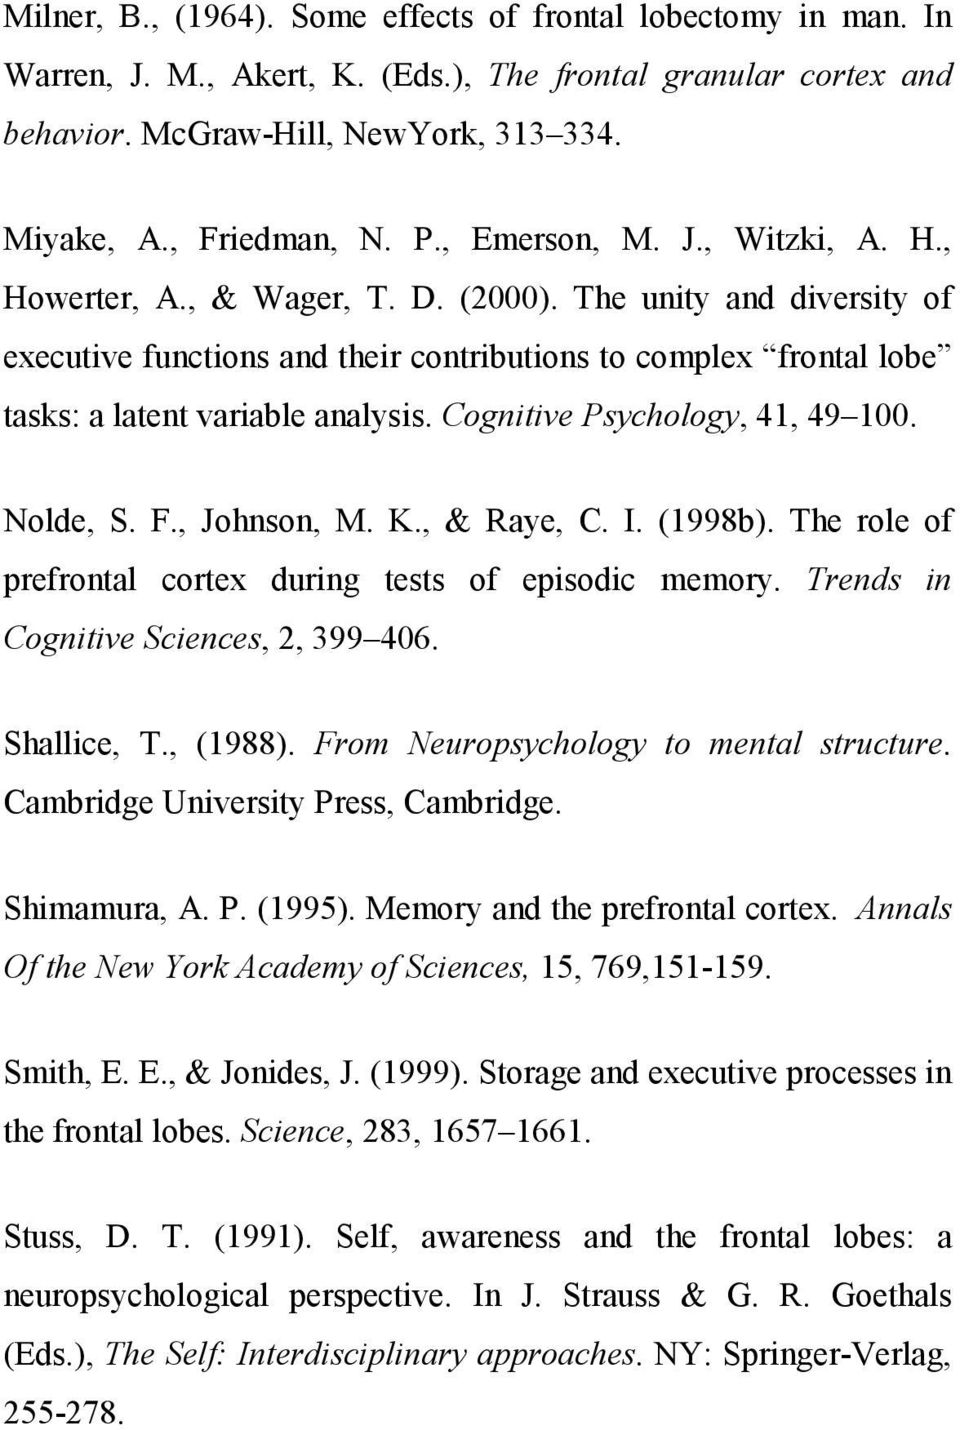 Cognitive Psychology, 41, 49 100. Nolde, S. F., Johnson, M. K., & Raye, C. I. (1998b). The role of prefrontal cortex during tests of episodic memory. Trends in Cognitive Sciences, 2, 399 406.